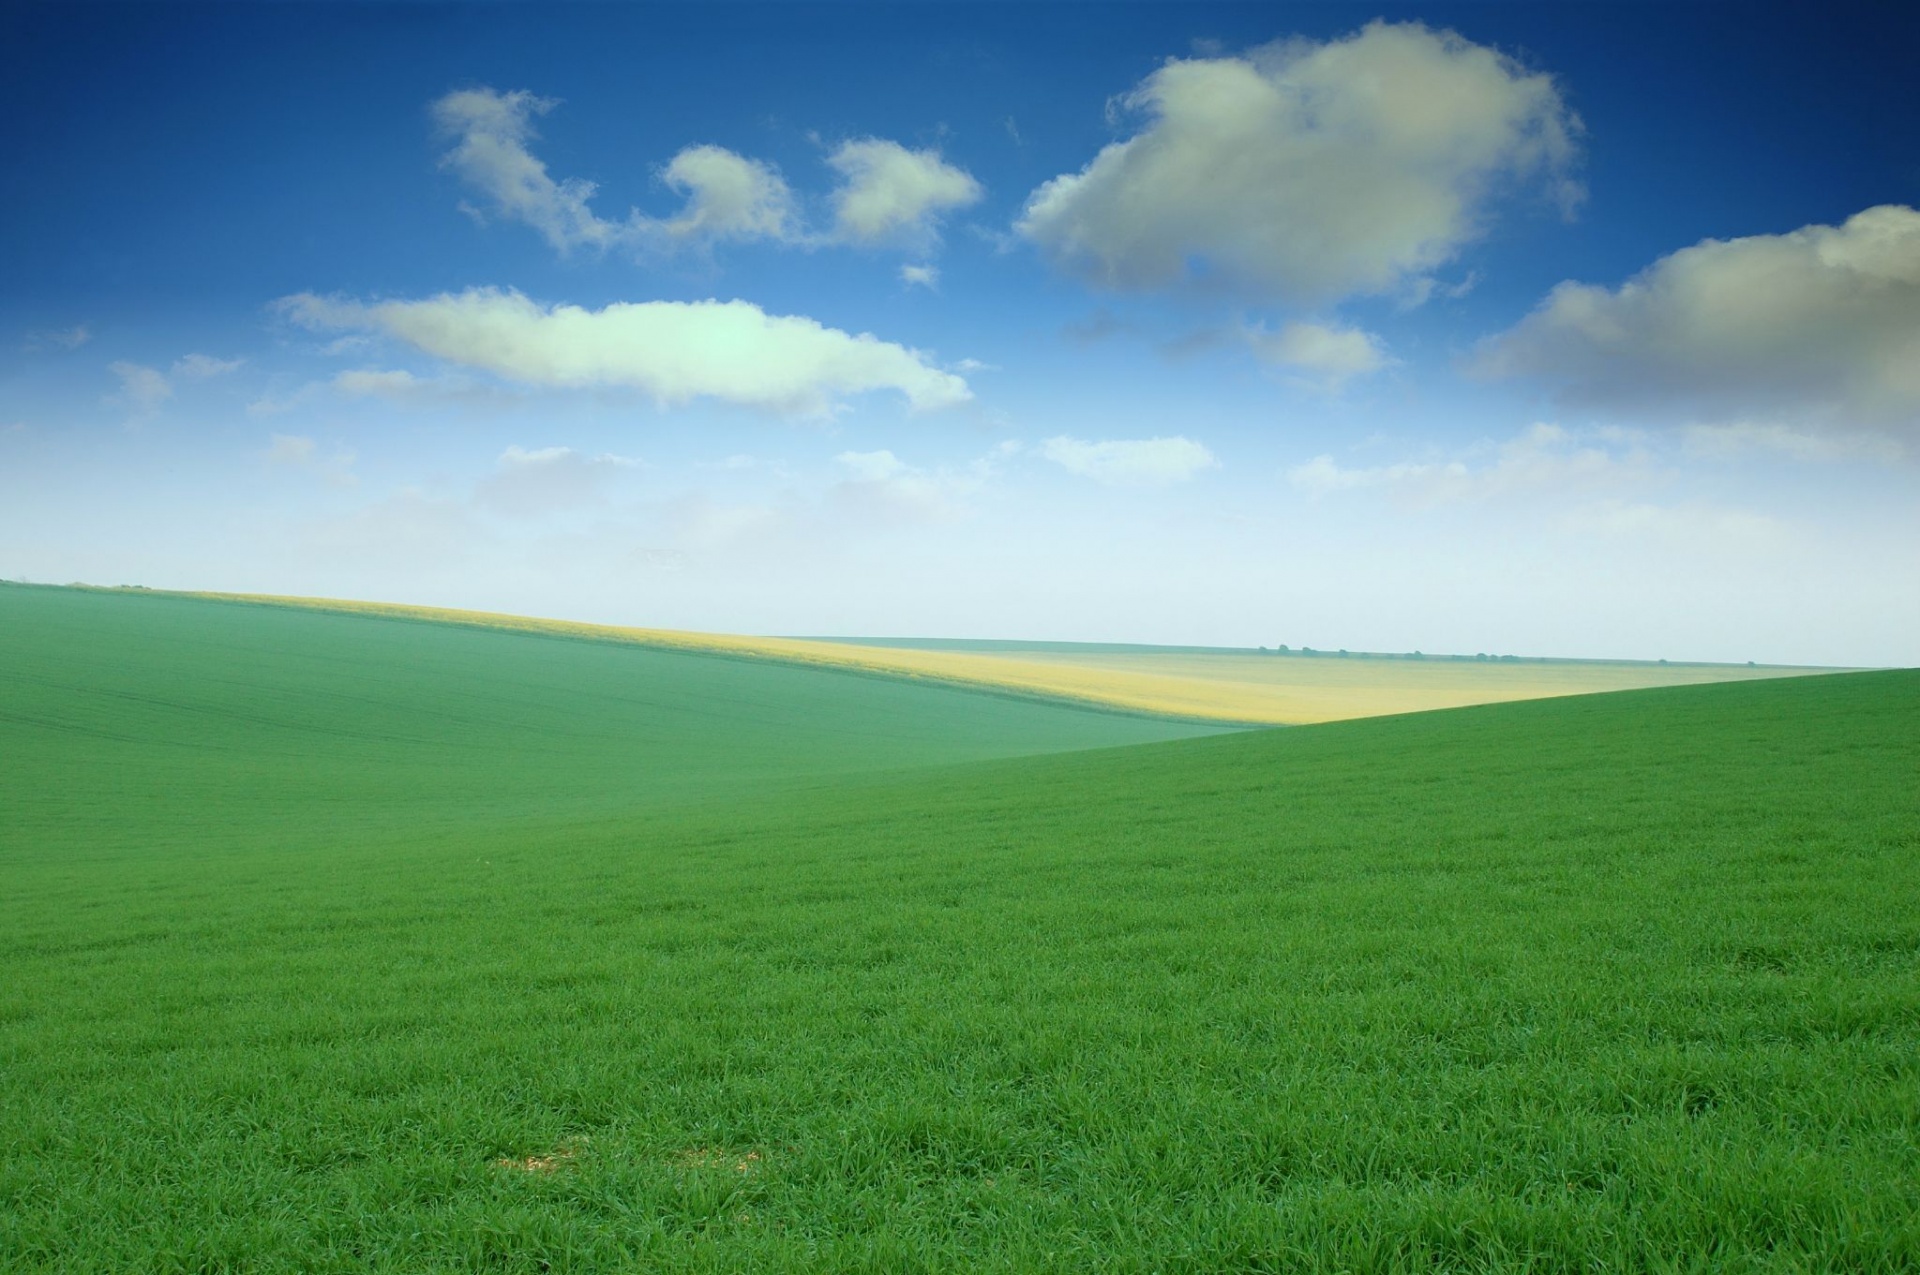 Green Field Dell wallpapershigh resolution High Definition Wallpapers